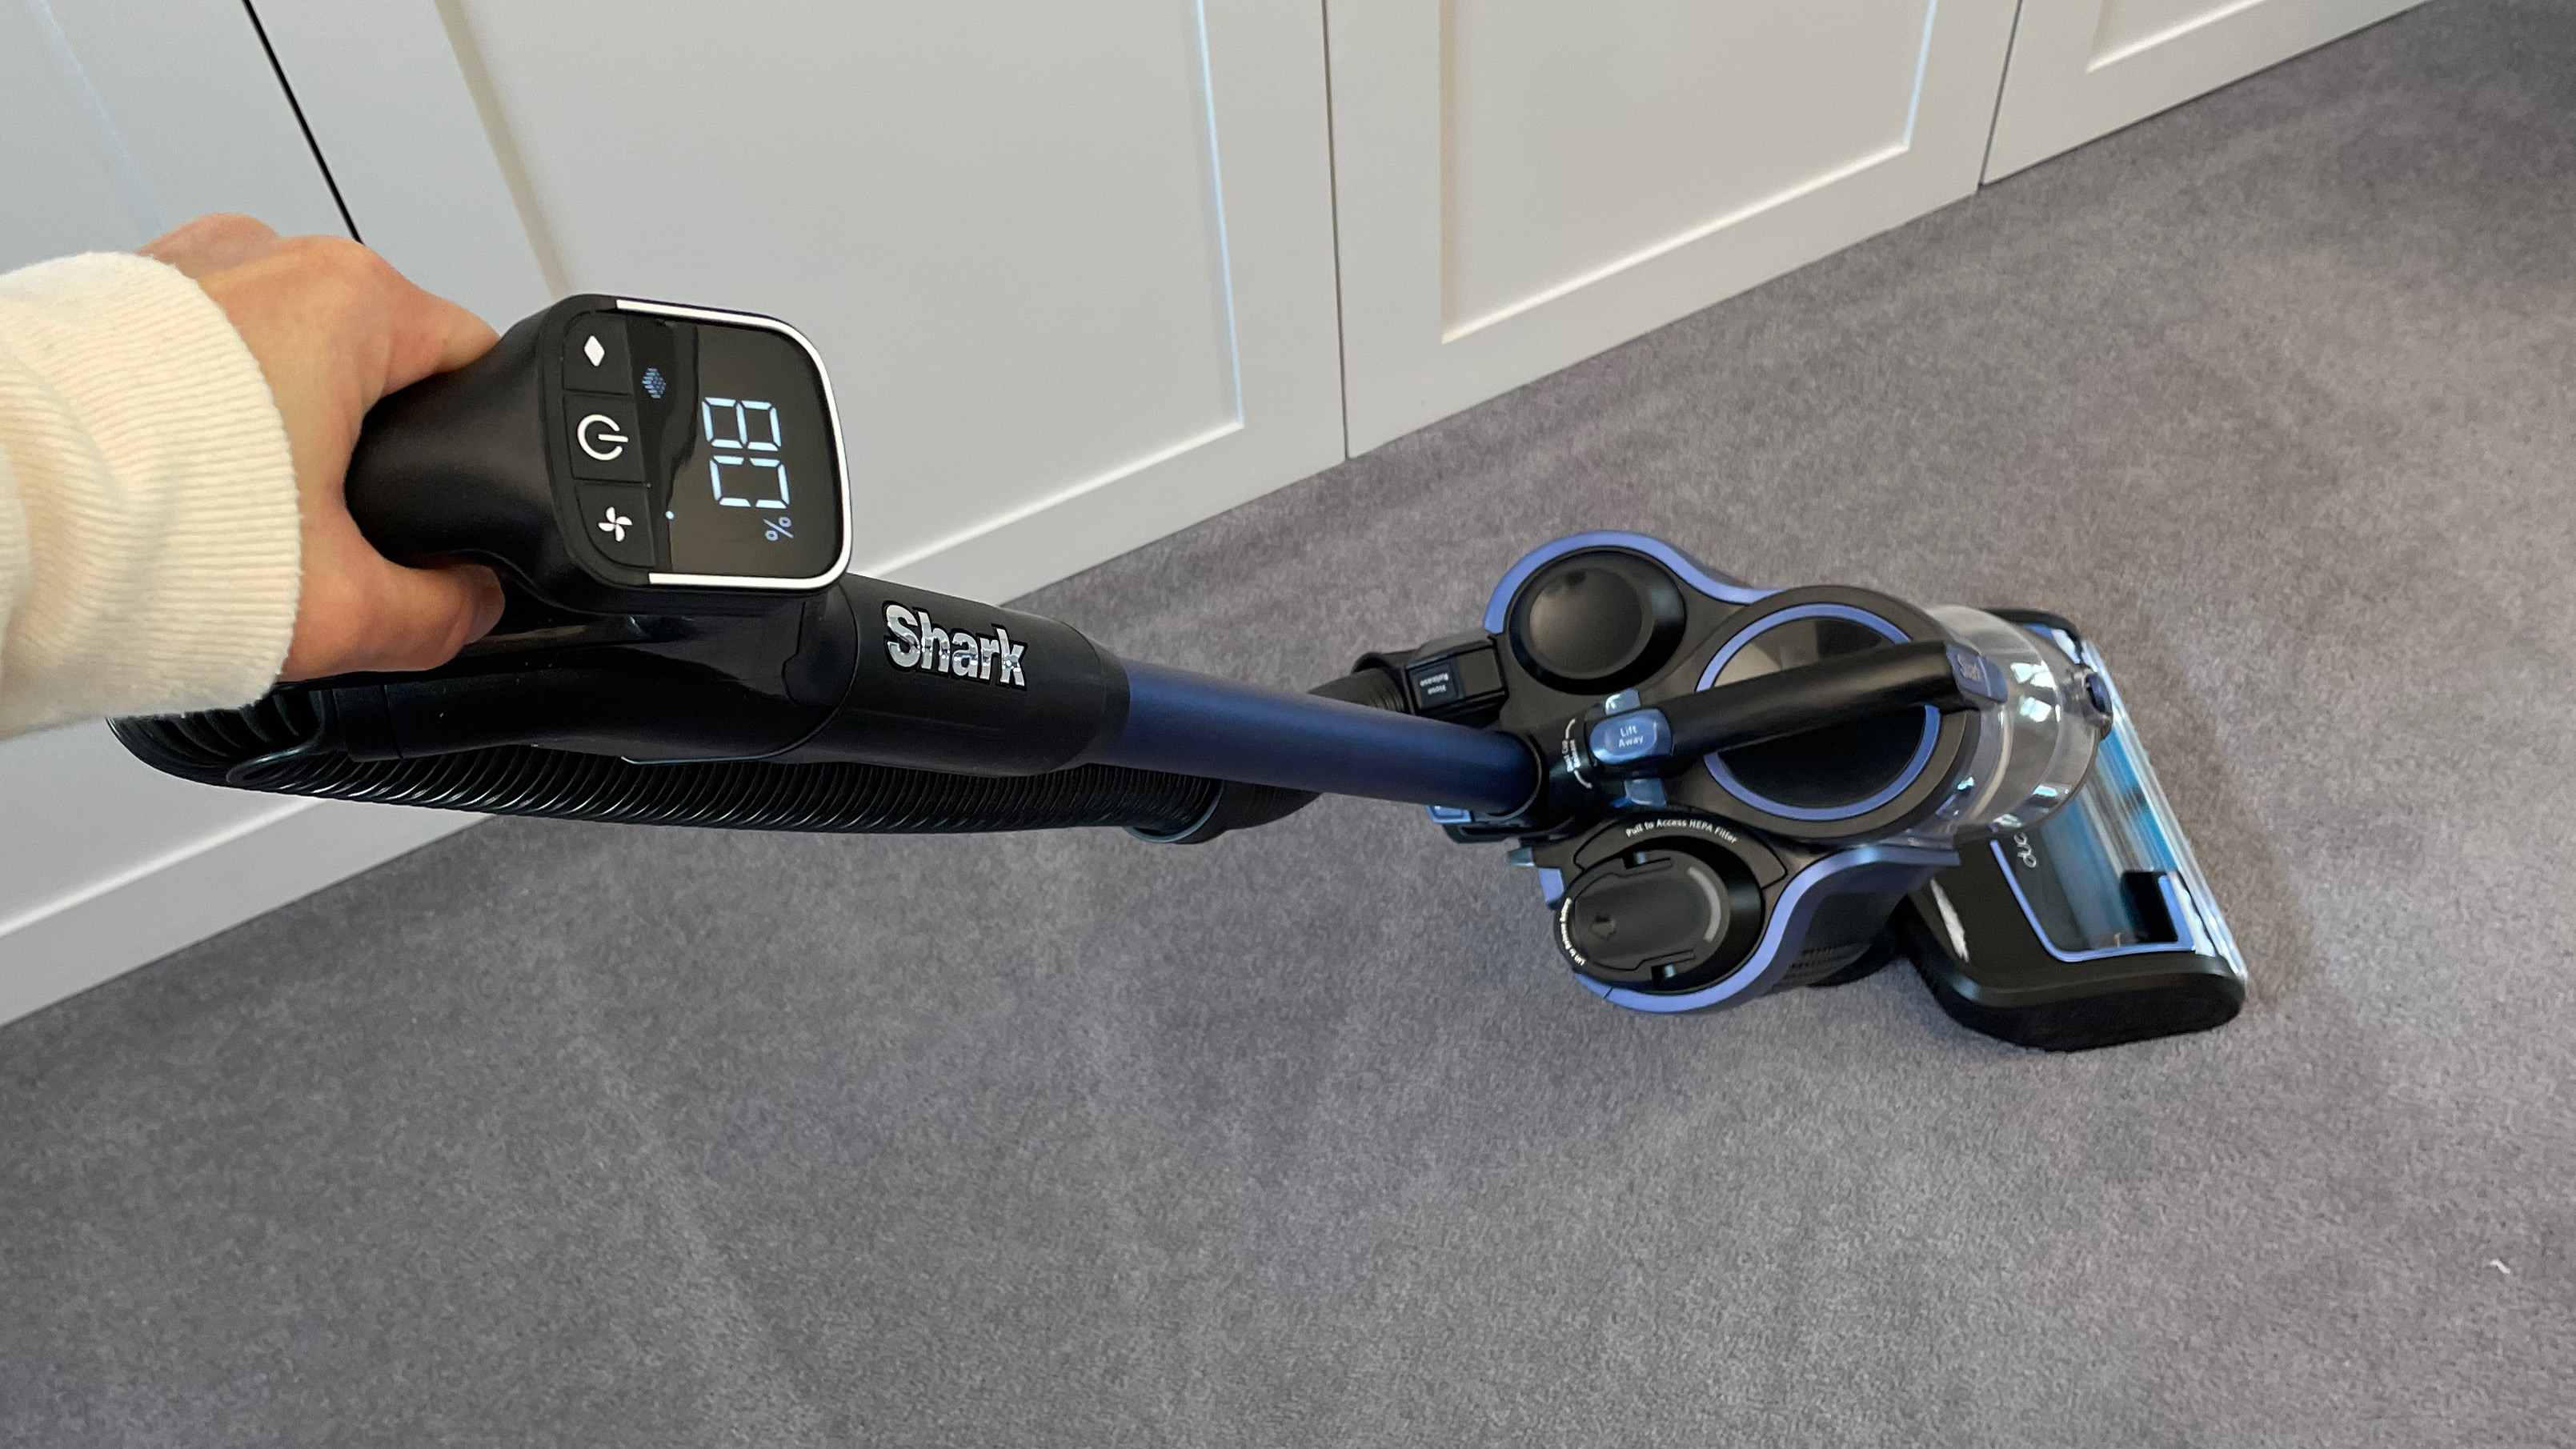 The Shark Anti Hair Wrap Cordless Upright Vacuum Cleaner with PowerFins, Powered Lift-Away & TruePet ICZ300UKT being used to clean carpet with a focus on the LCD screen